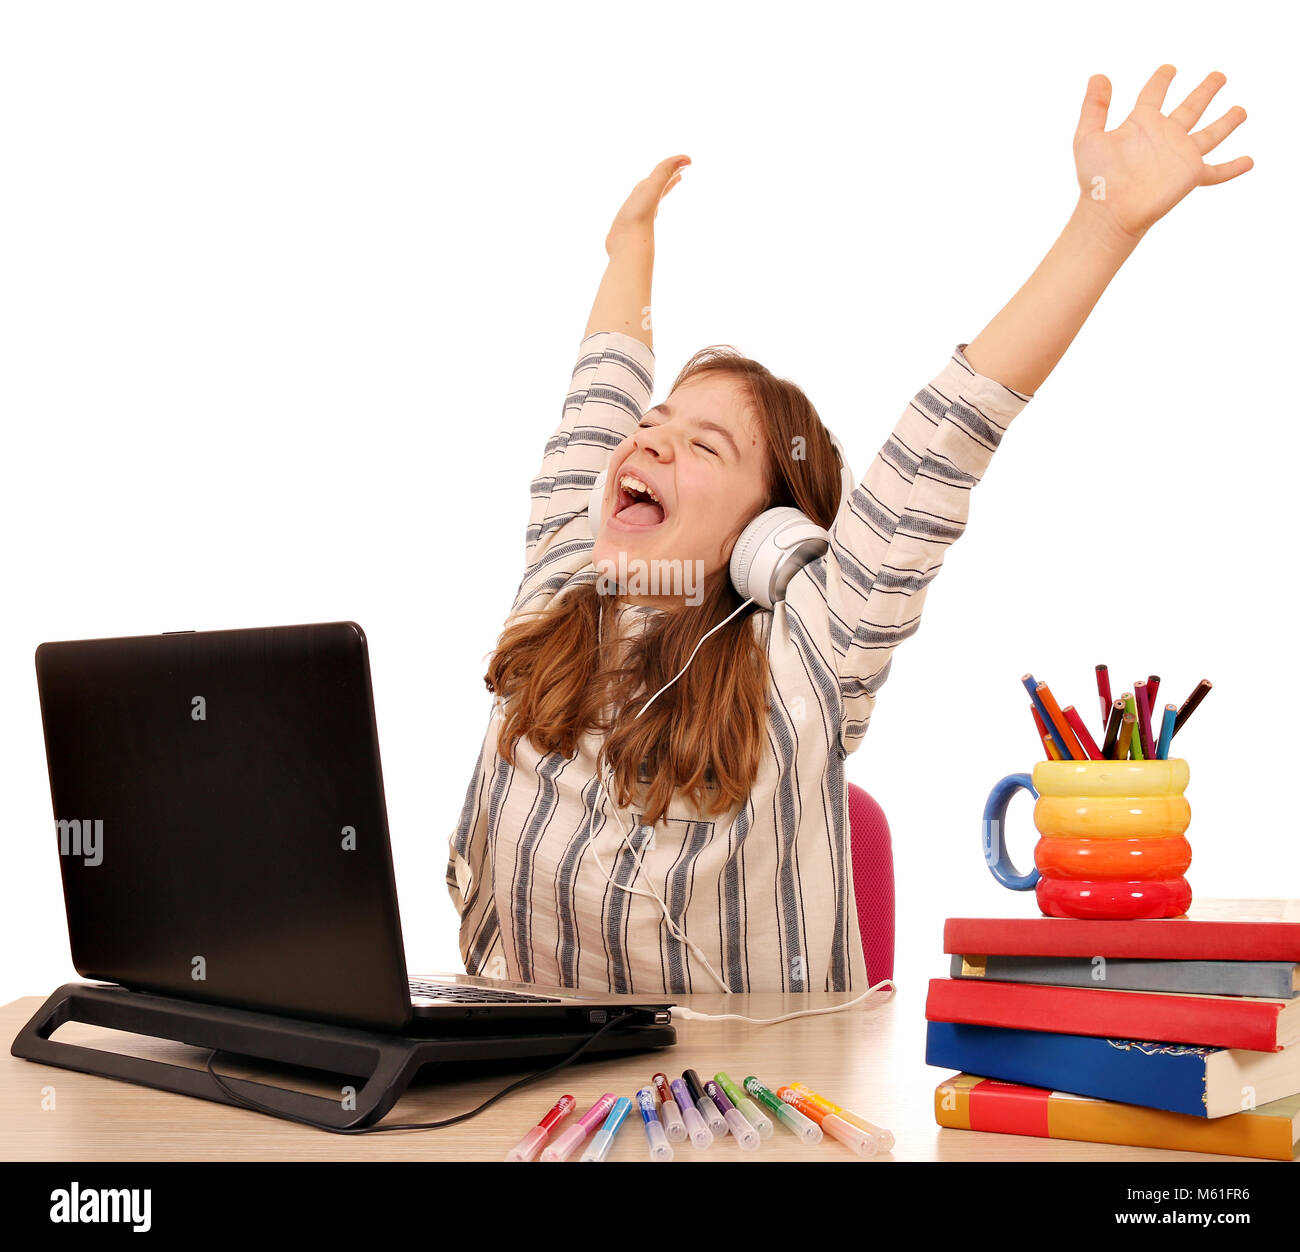 Happy little girl with hands up listens to music on laptop Stock Photo